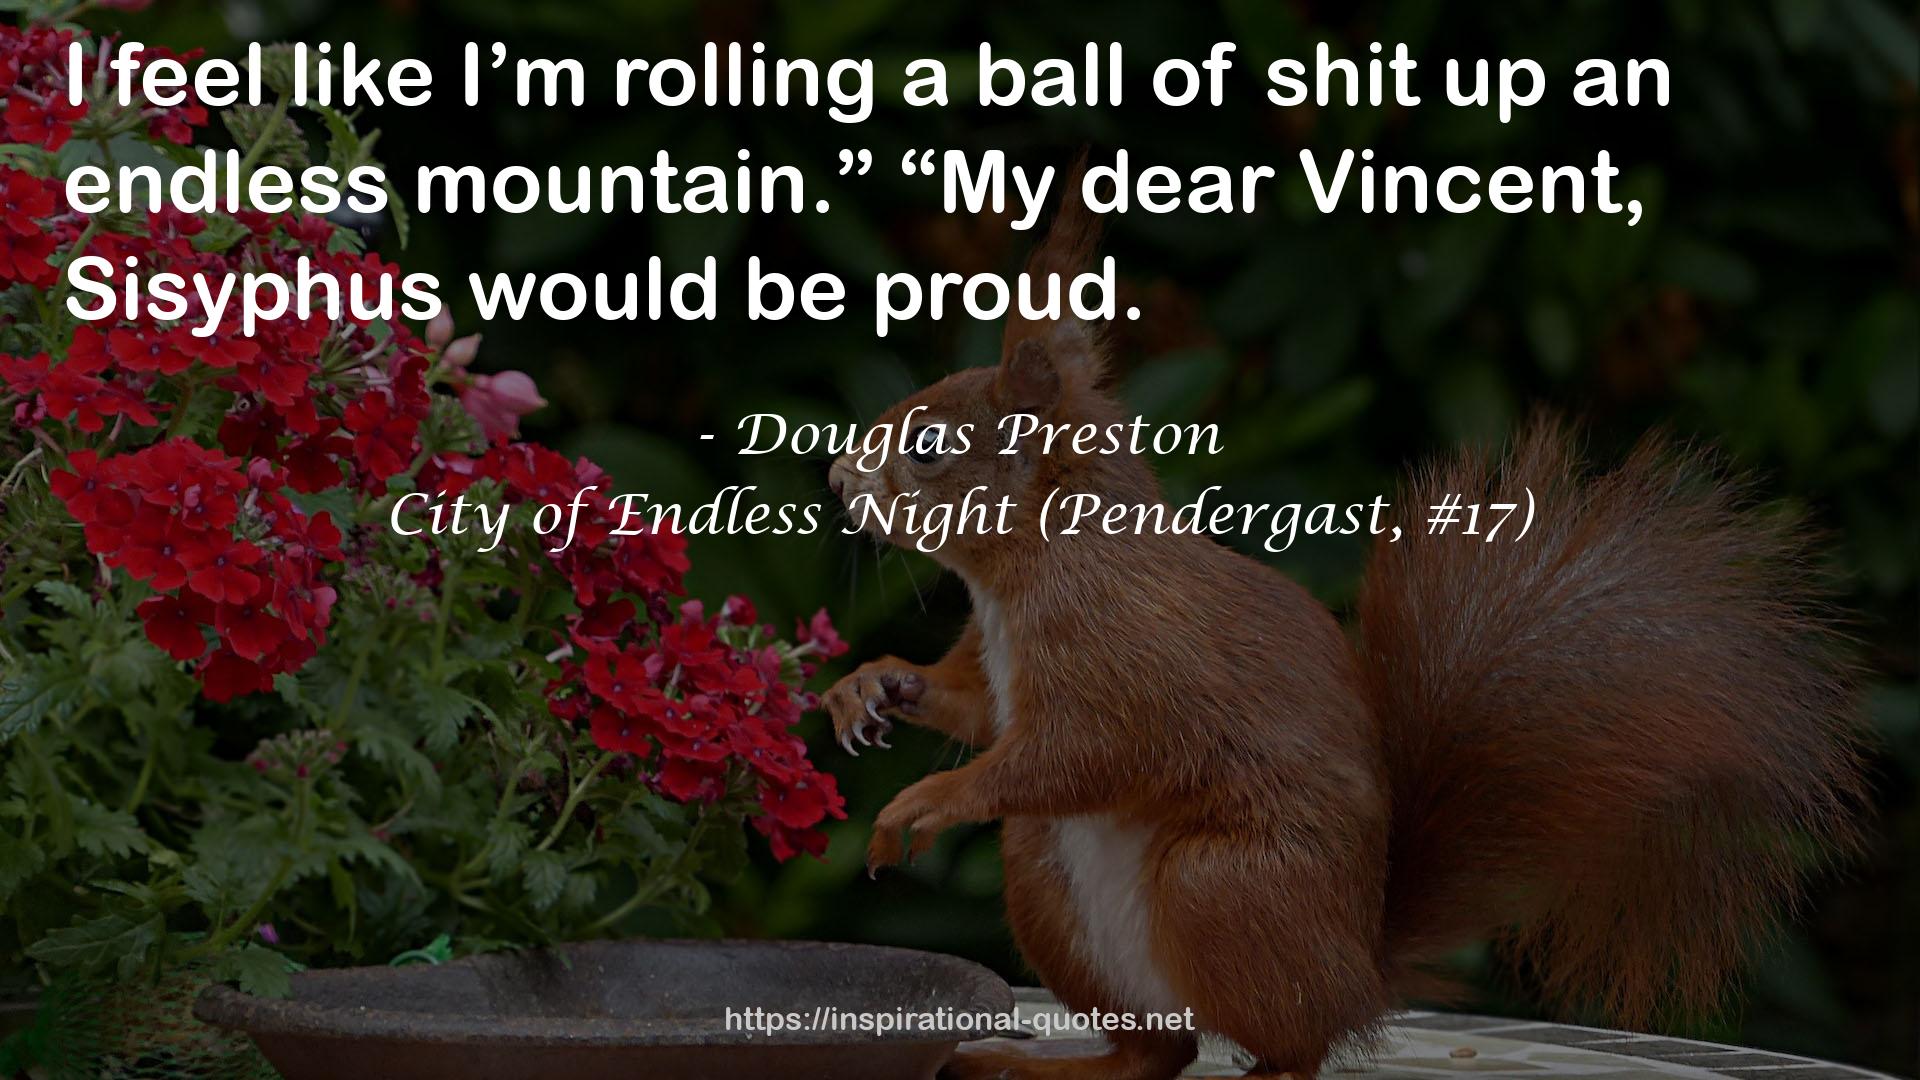 City of Endless Night (Pendergast, #17) QUOTES